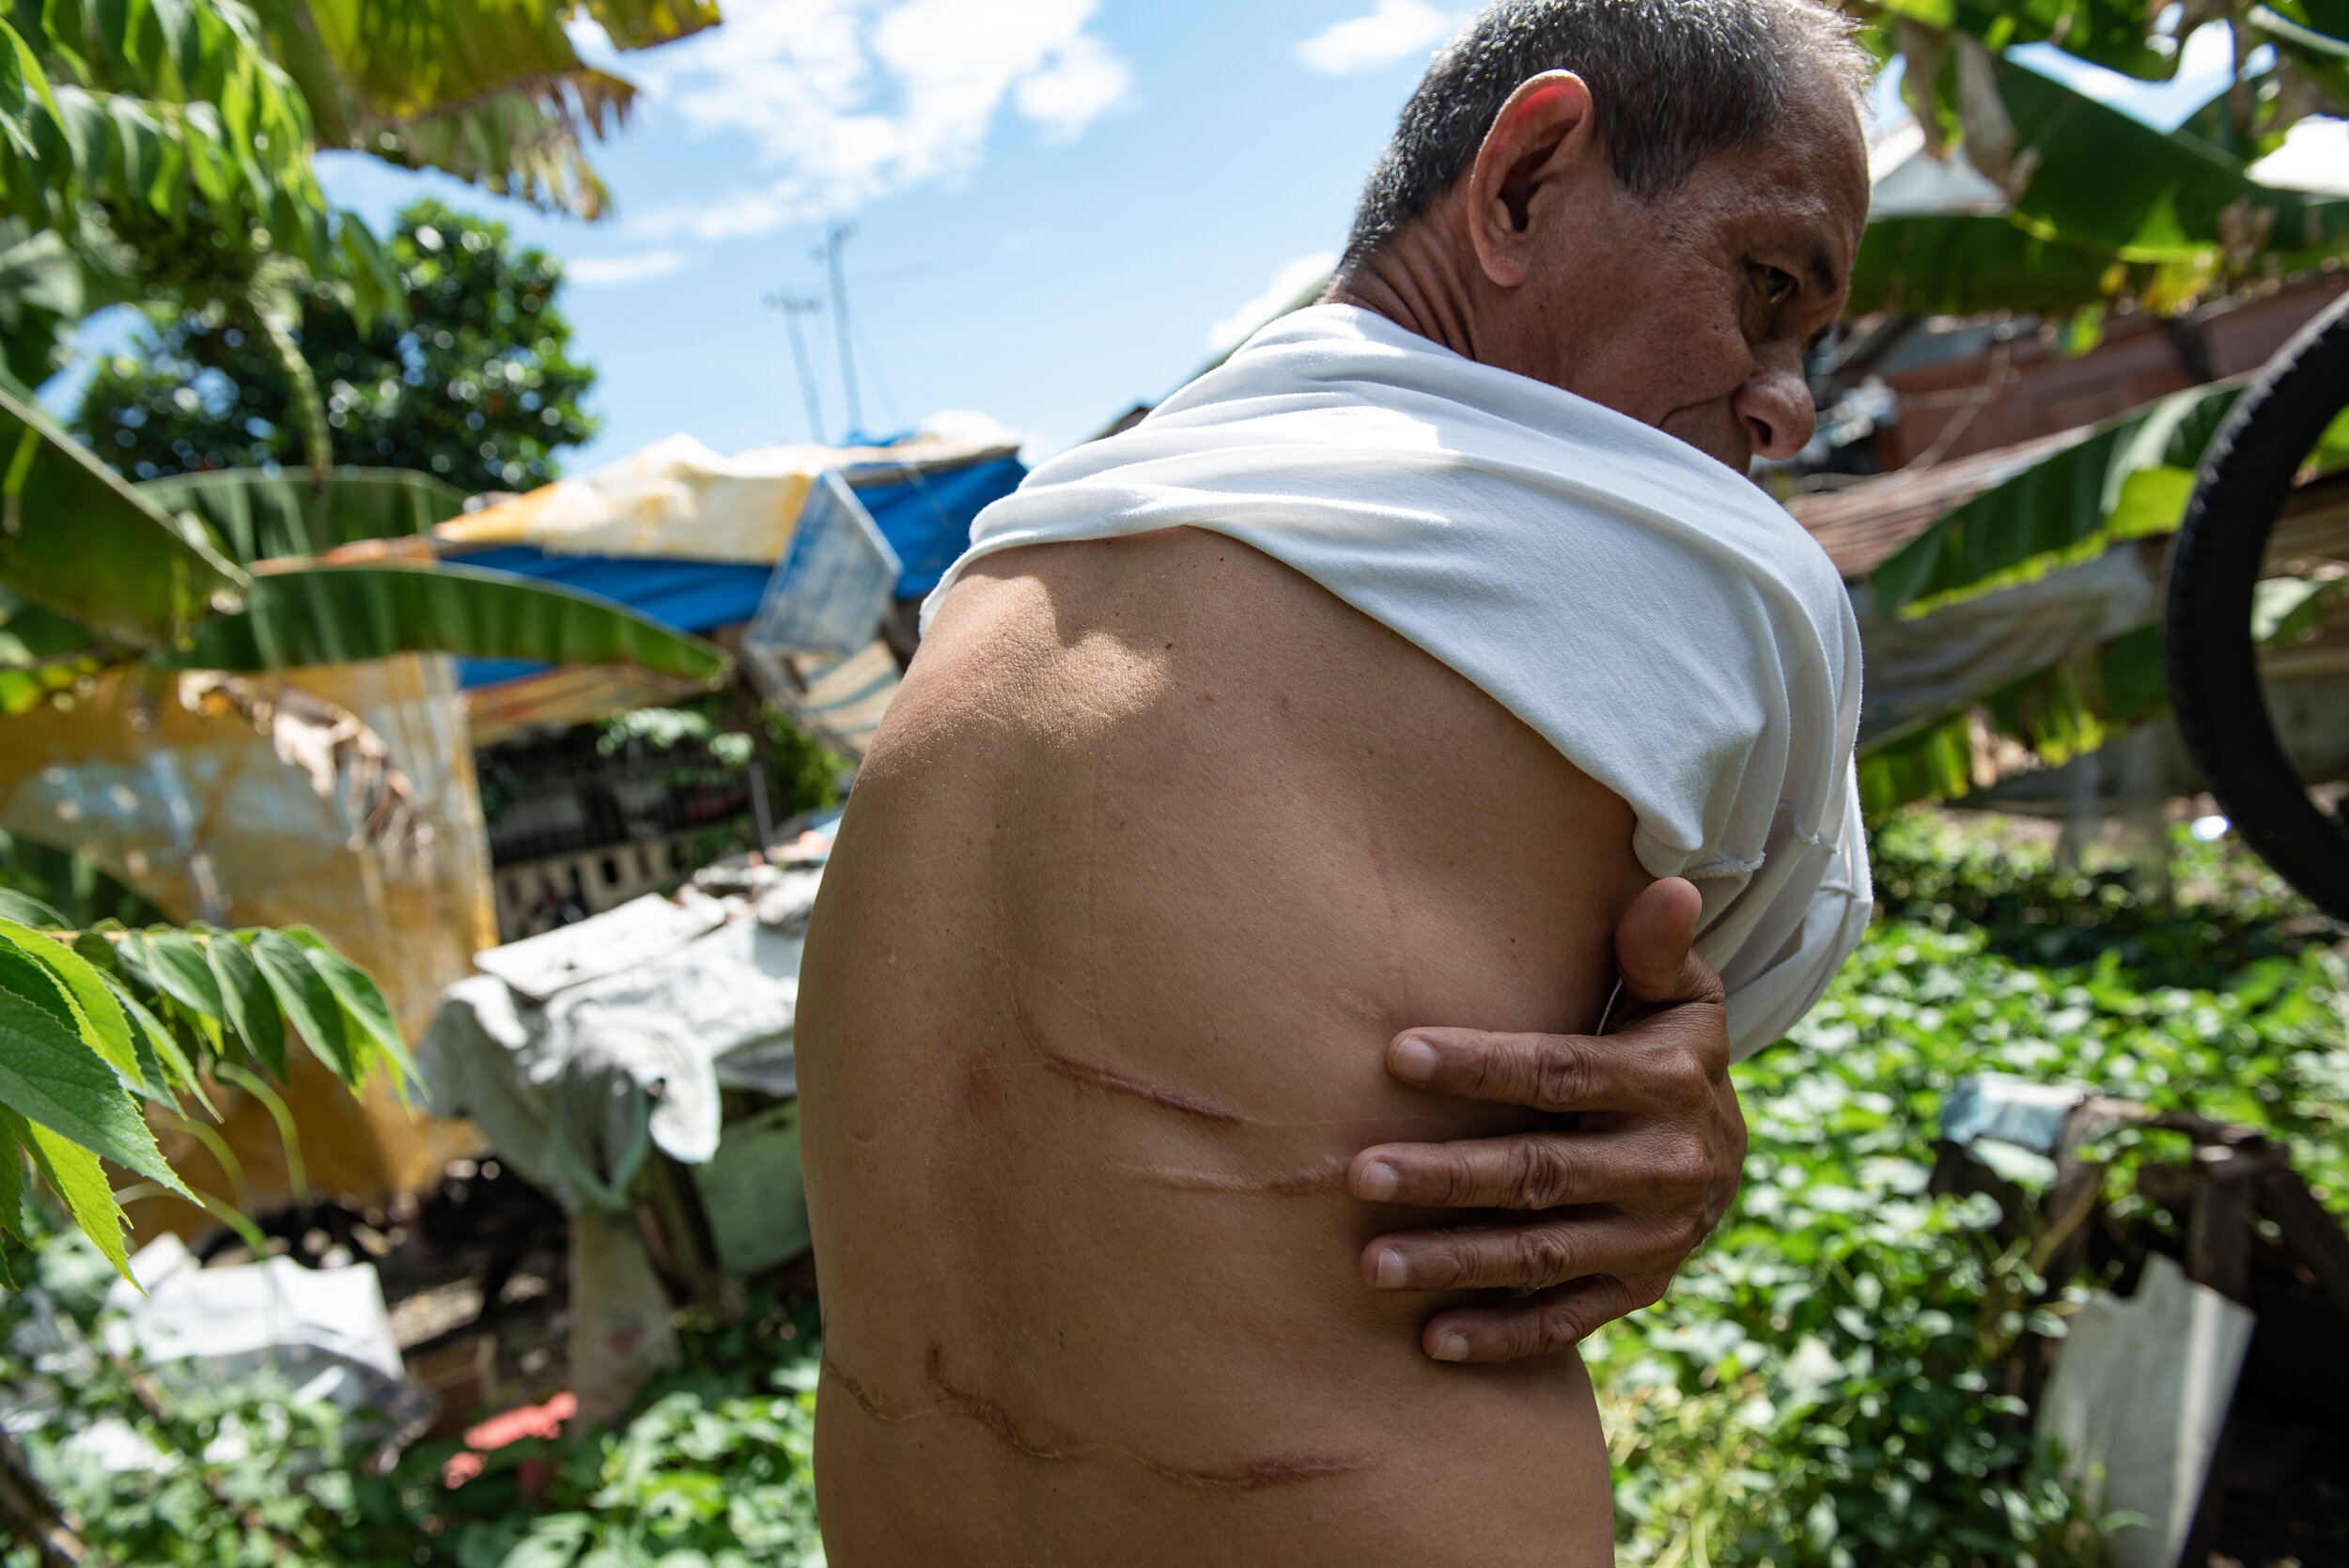  Ramon Estur, age 60, shows the scars he obtained from having been hit in the back by loose galvanized iron sheets. 